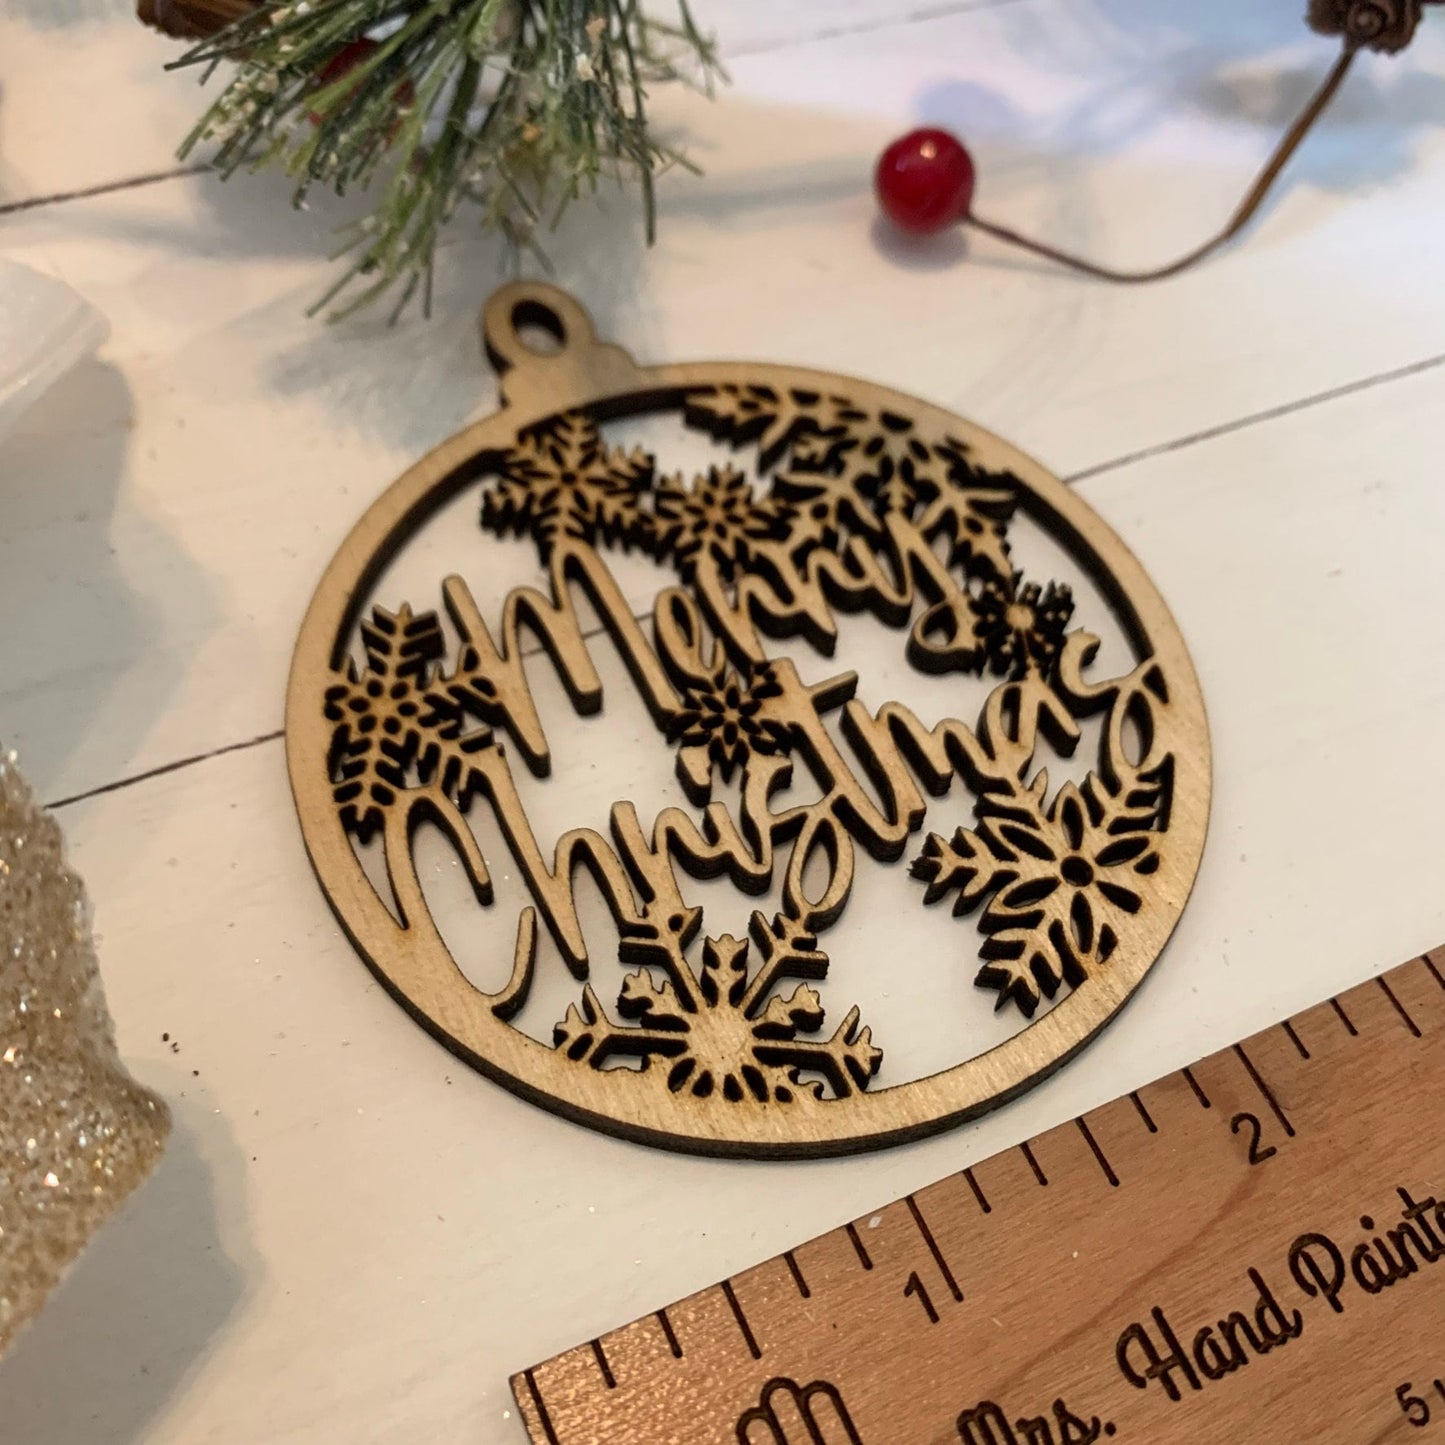 Laser Cut Wood "Merry Christmas" with Snowflakes Ornaments - Delicate Rustic Christmas Holiday Decor - Unfinished Wood